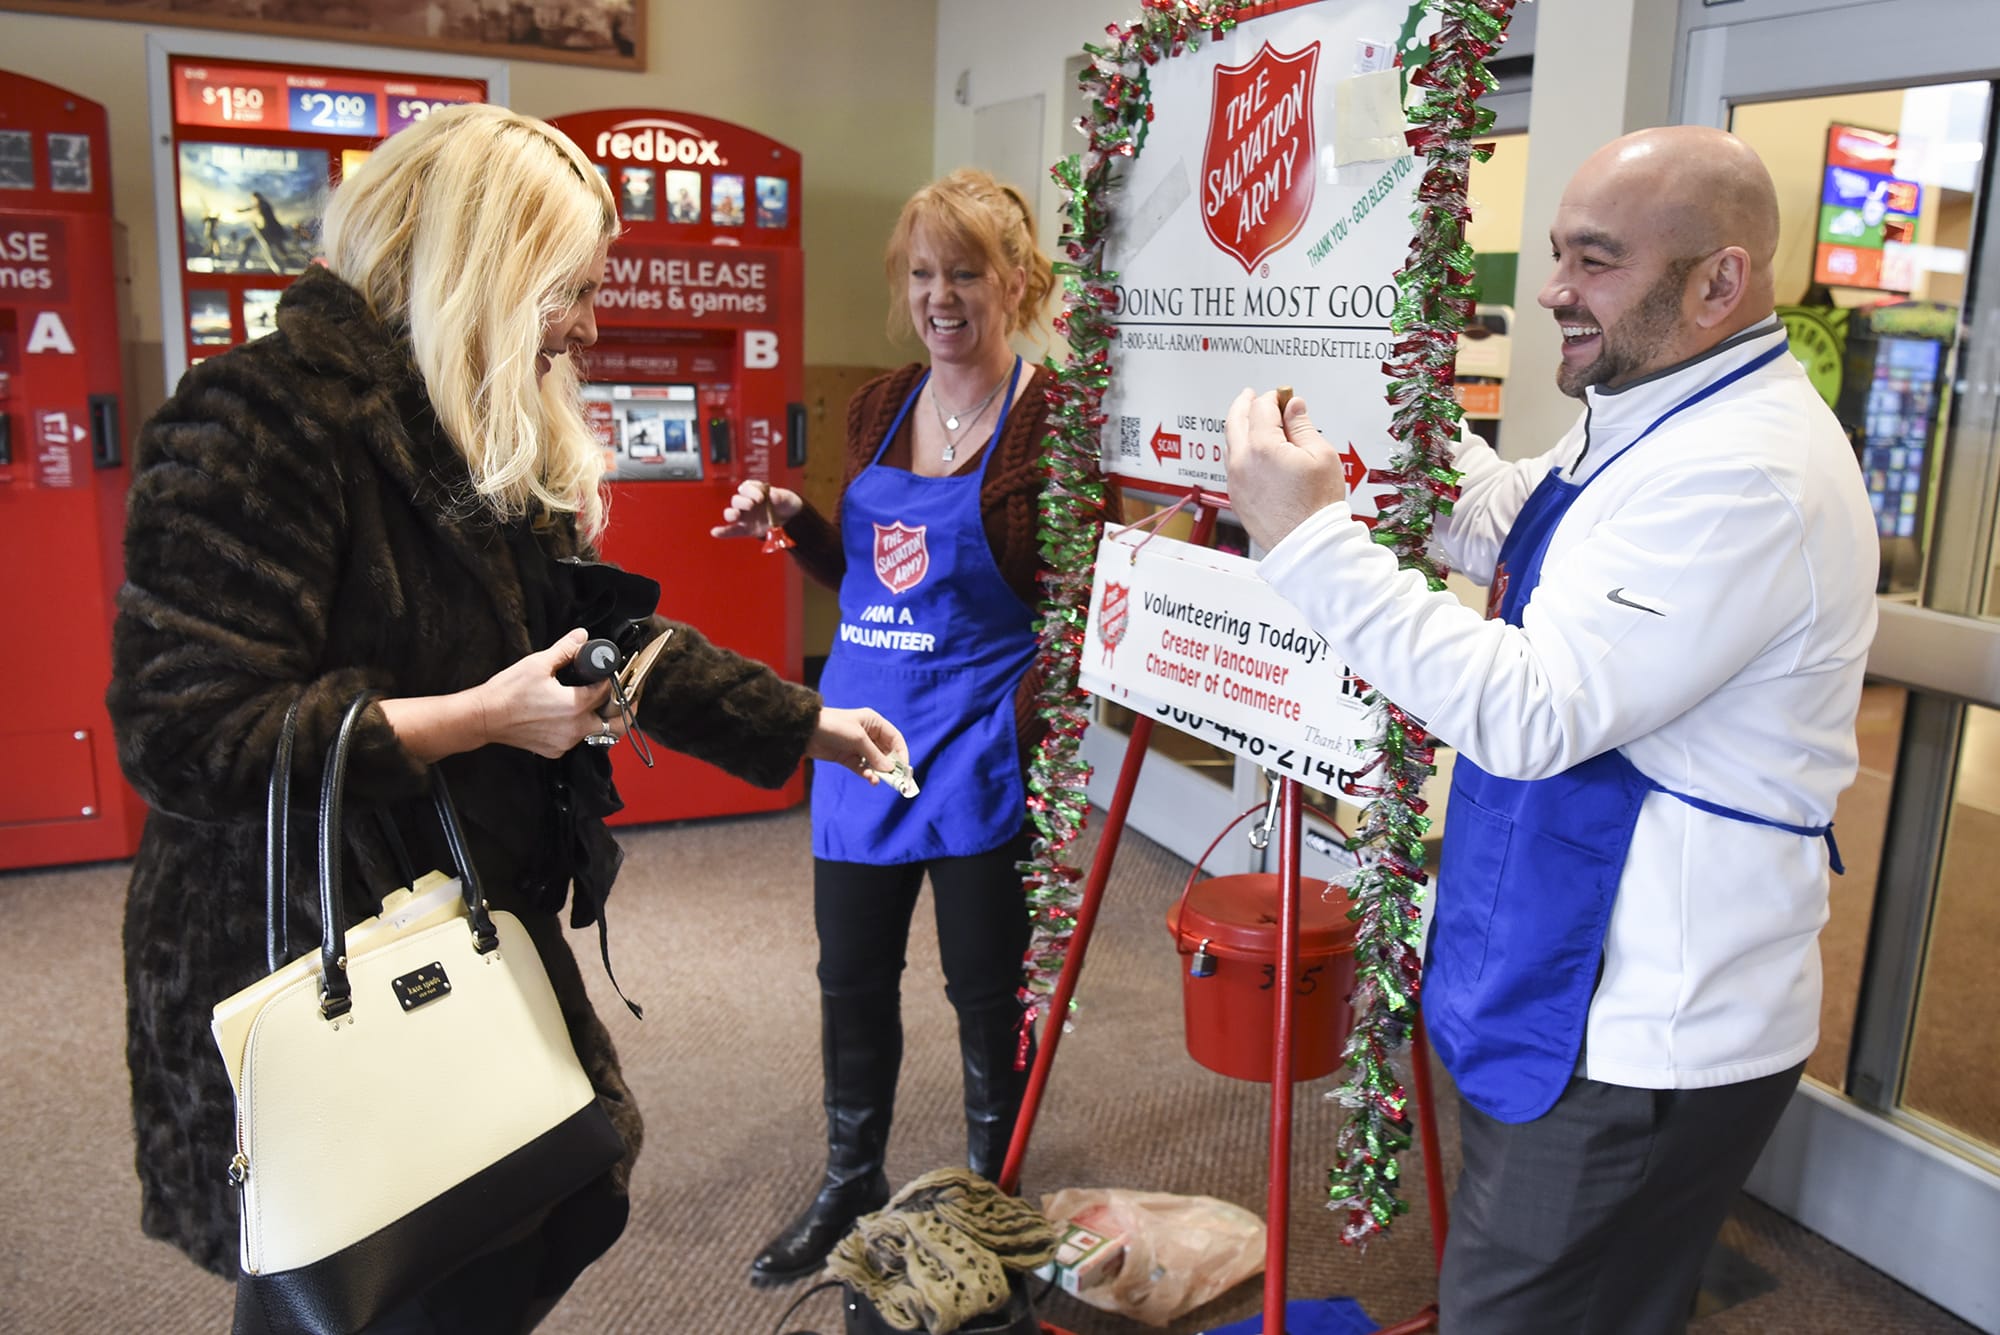 Carol Bua, left, donates spare change to Salvation Army bell ringers, Amy Ohara, center, and Eric Sawyer, who are on the Board of Directors for the Greater Vancouver Chamber of Commerce, Wednesday November 30, 2016 at the Grand Central Station Fred Meyer.